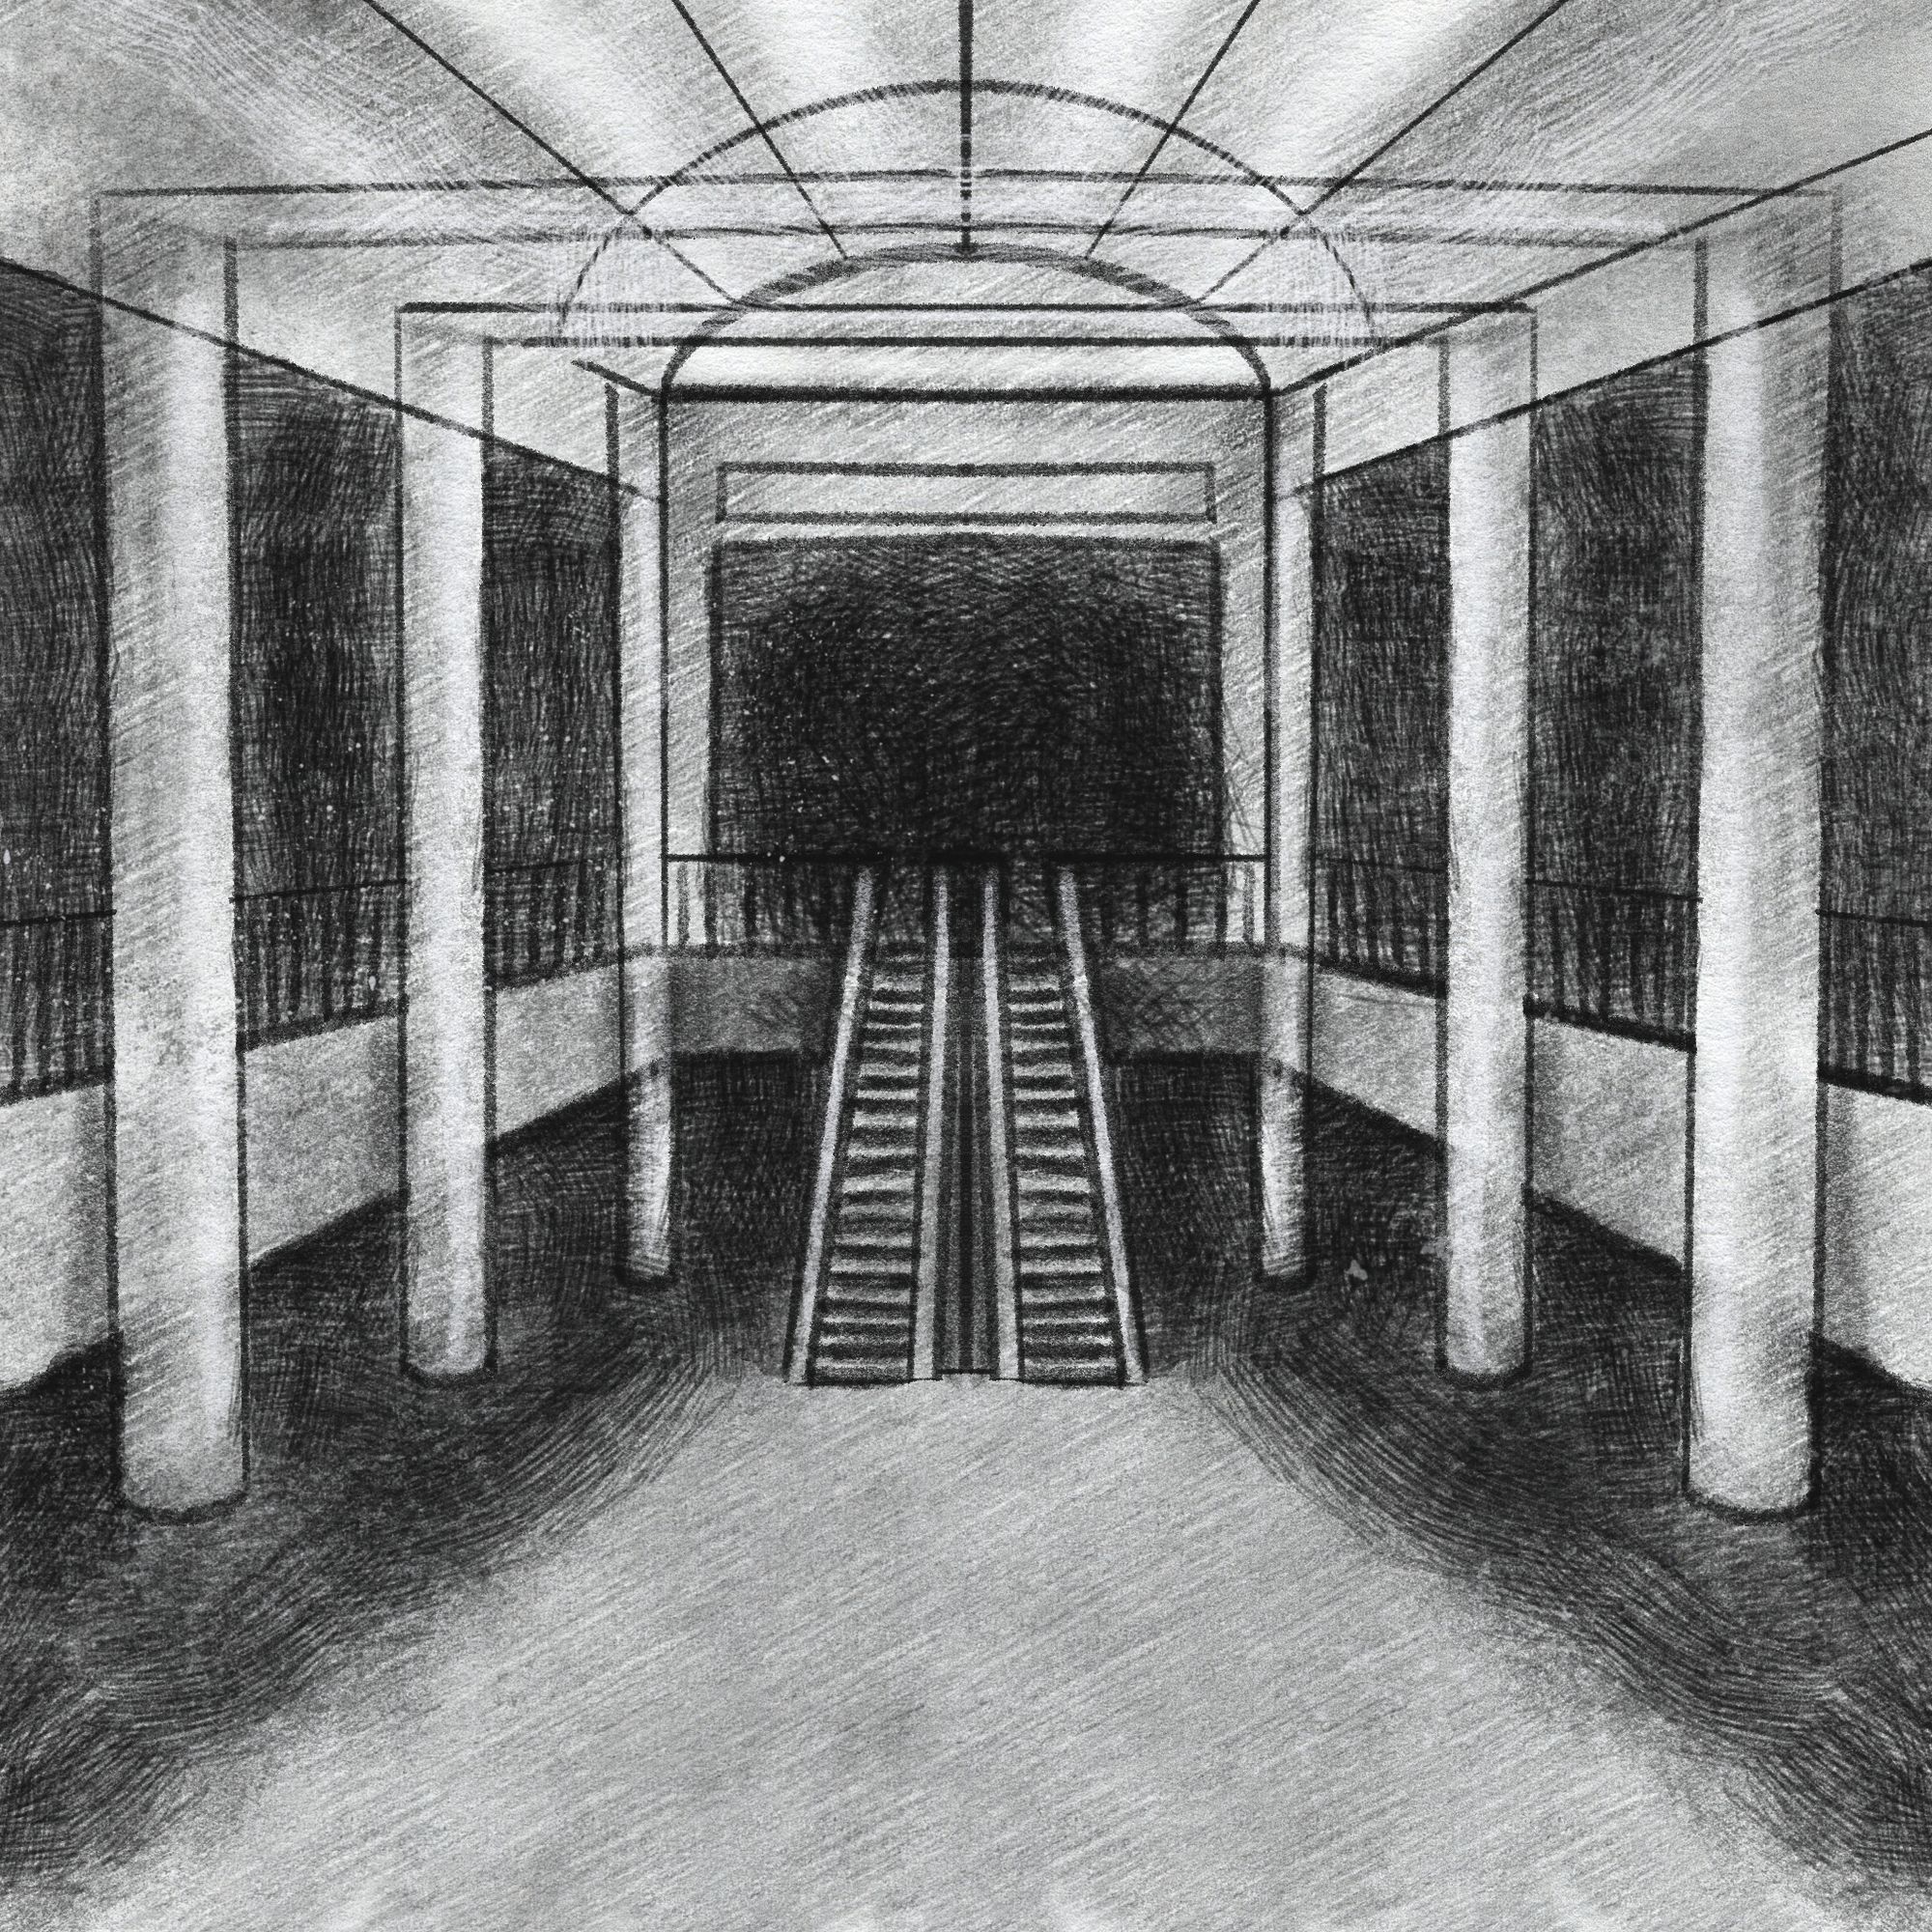 a black and white graphite-style digital sketch of a dead mall